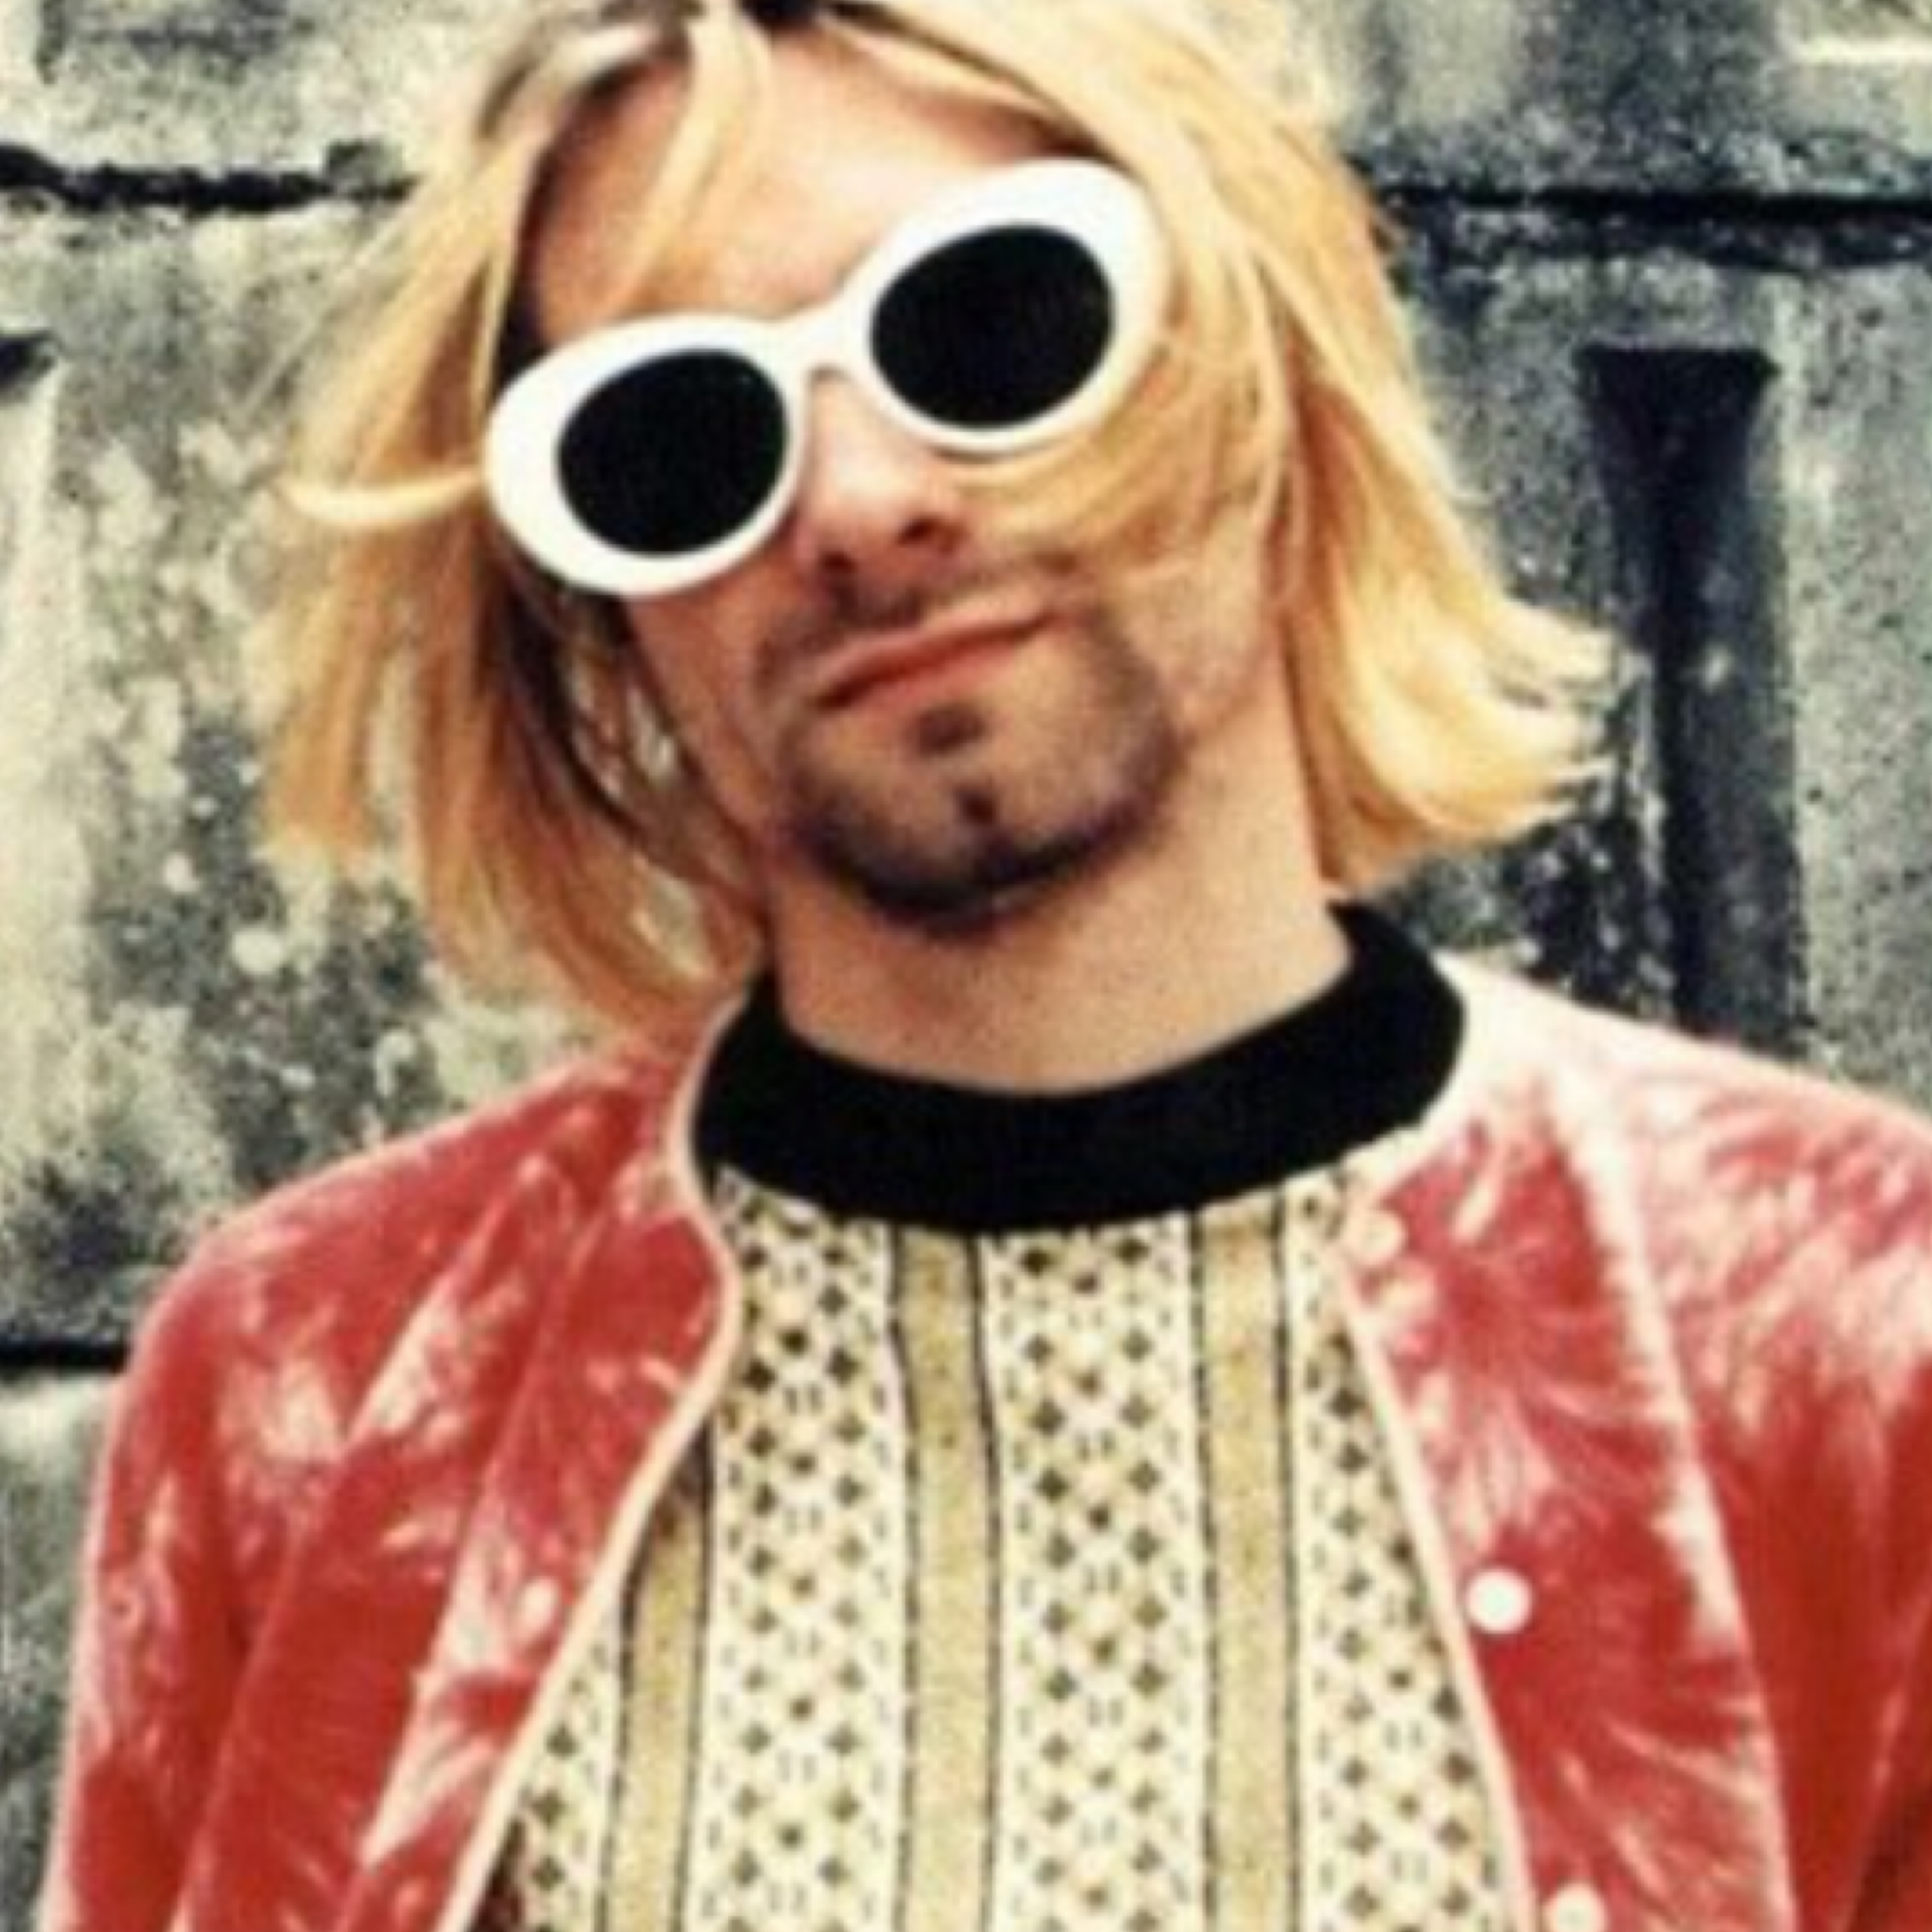 How to style your sunglasses like Iconic Rockstars Kurt Cobain, Liam Gallagher and more